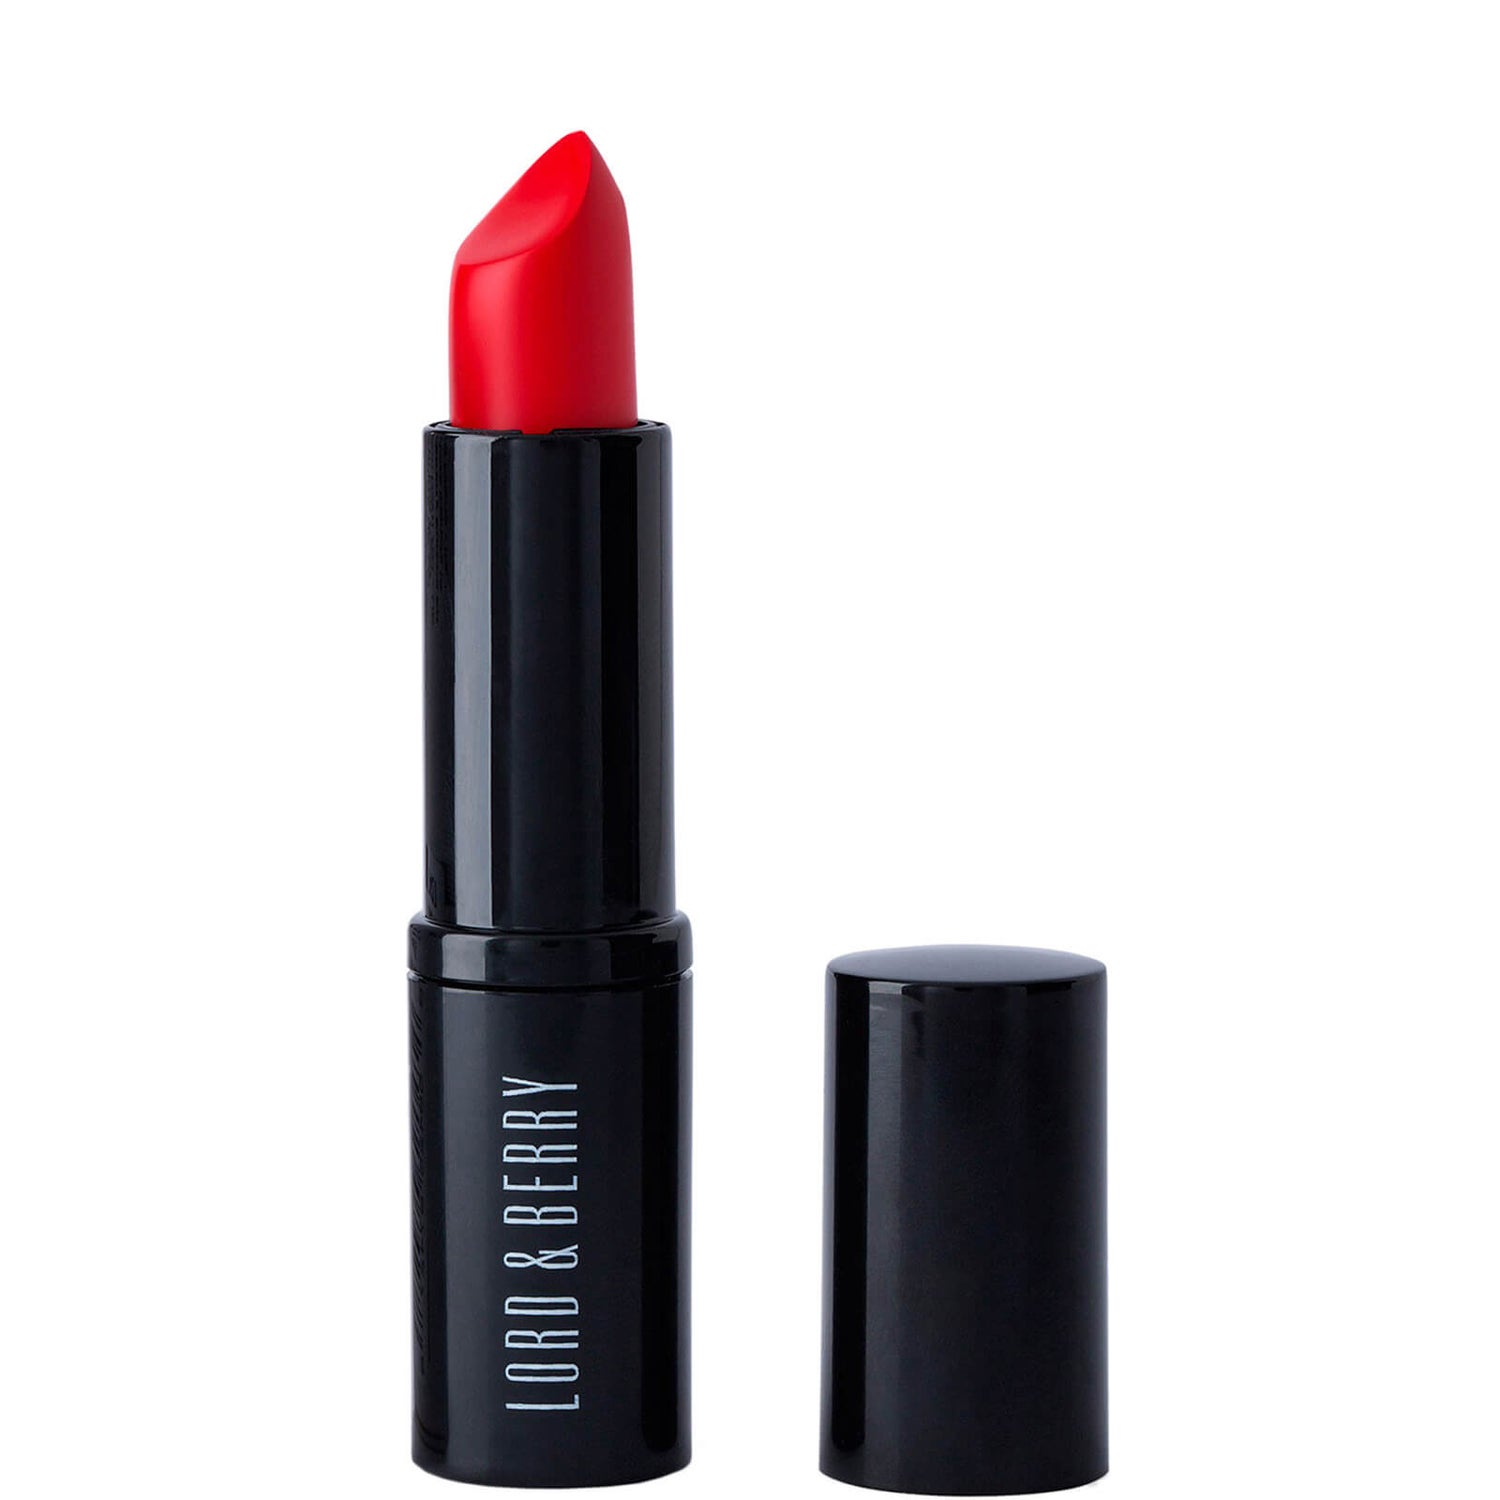 Lord & Berry Vogue Lipstick (various colors)